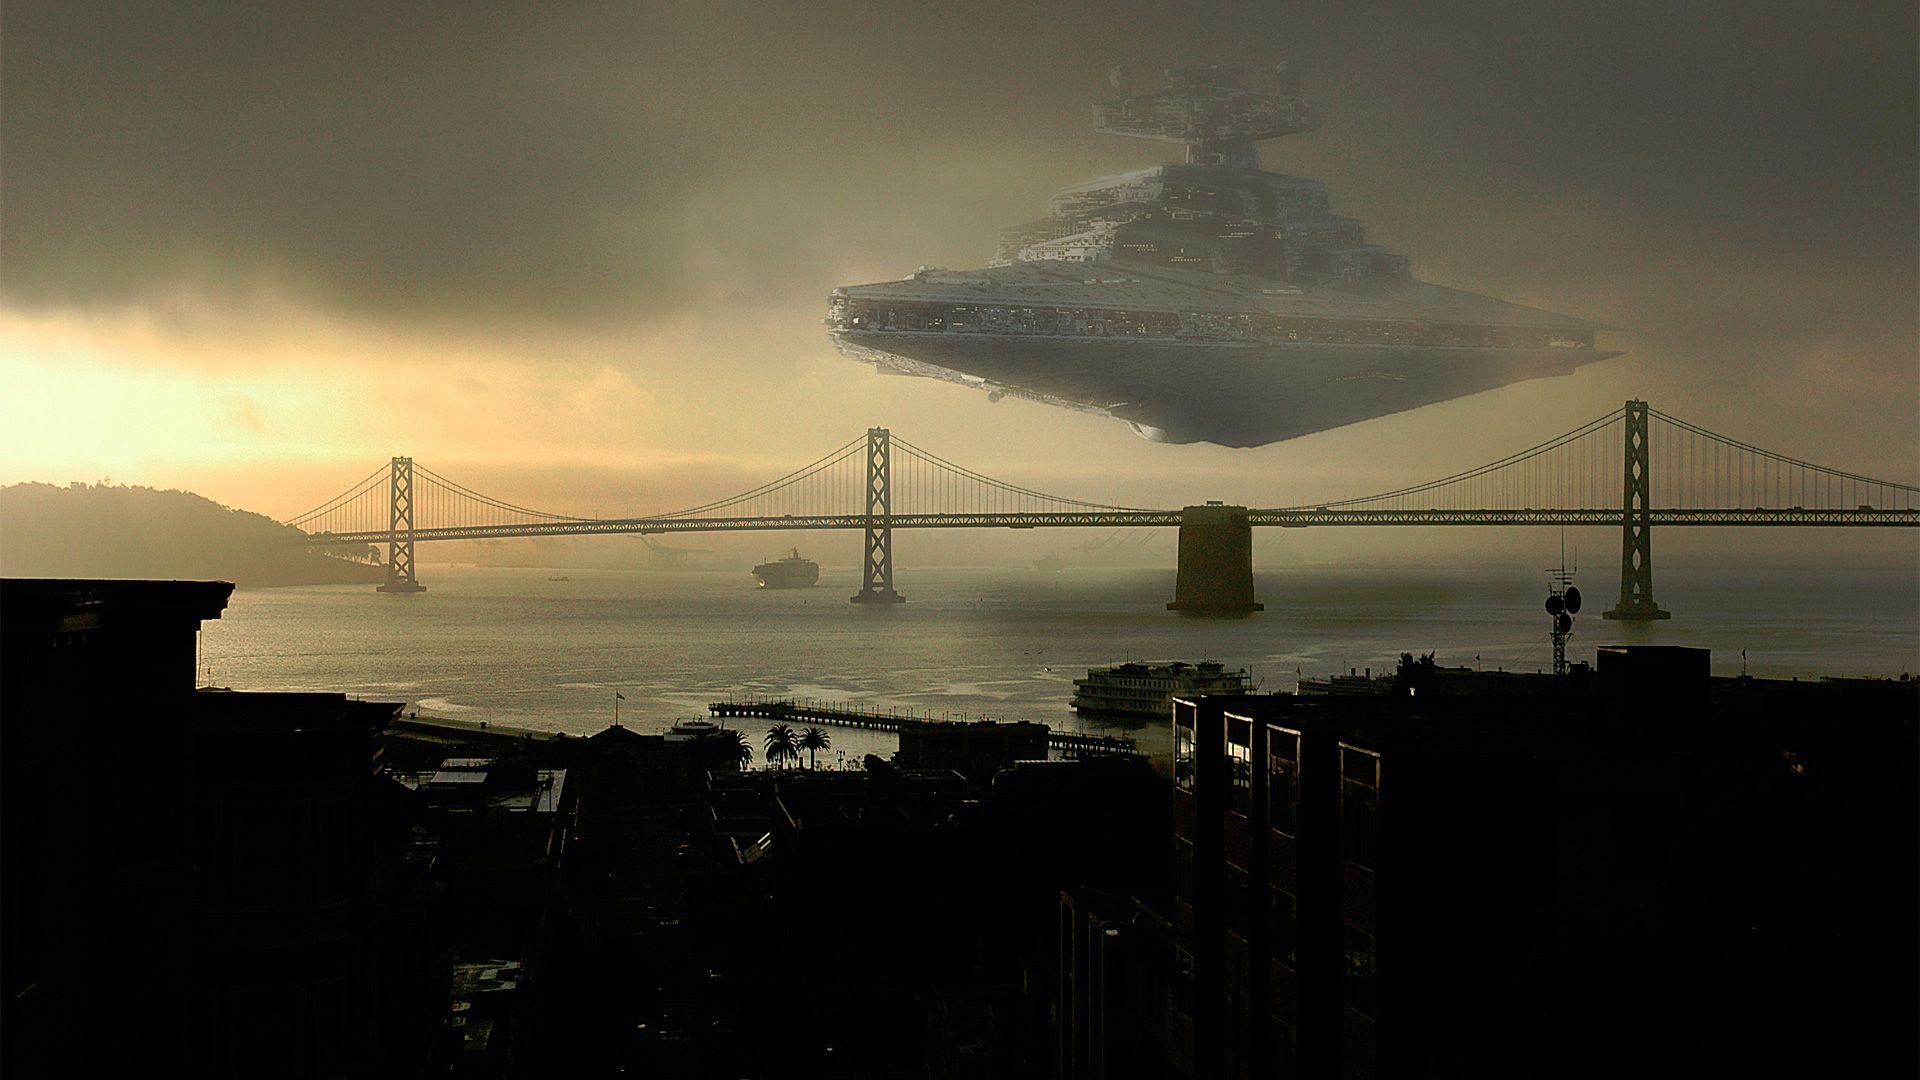 Star Wars City Wallpapers - Top Free Star Wars City Backgrounds